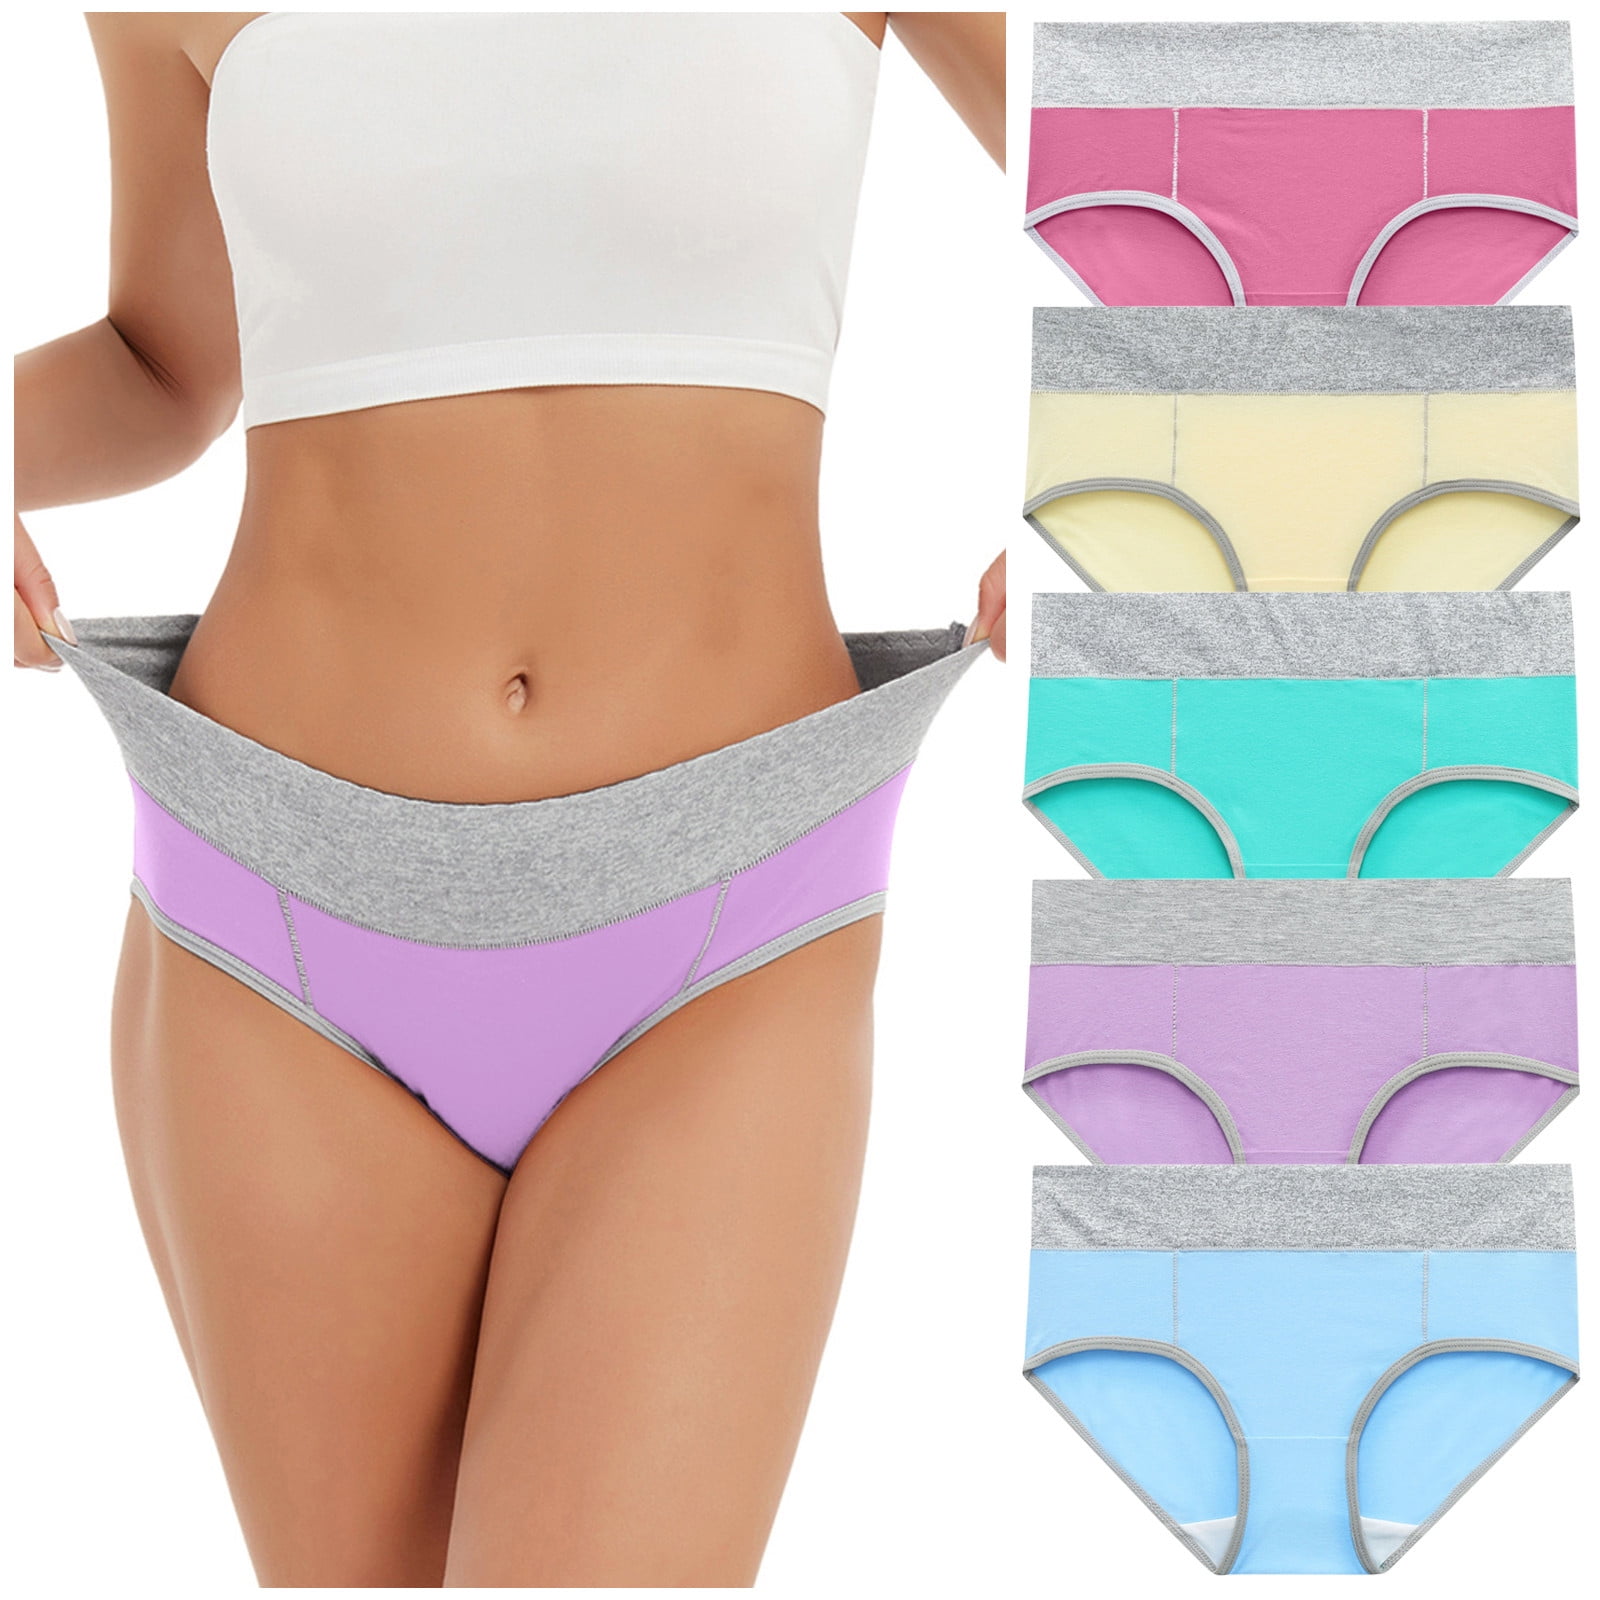 Follure Women's High Waisted Cotton Underwear Full Covered Breathable  Briefs Ladies Panties 5Pack 